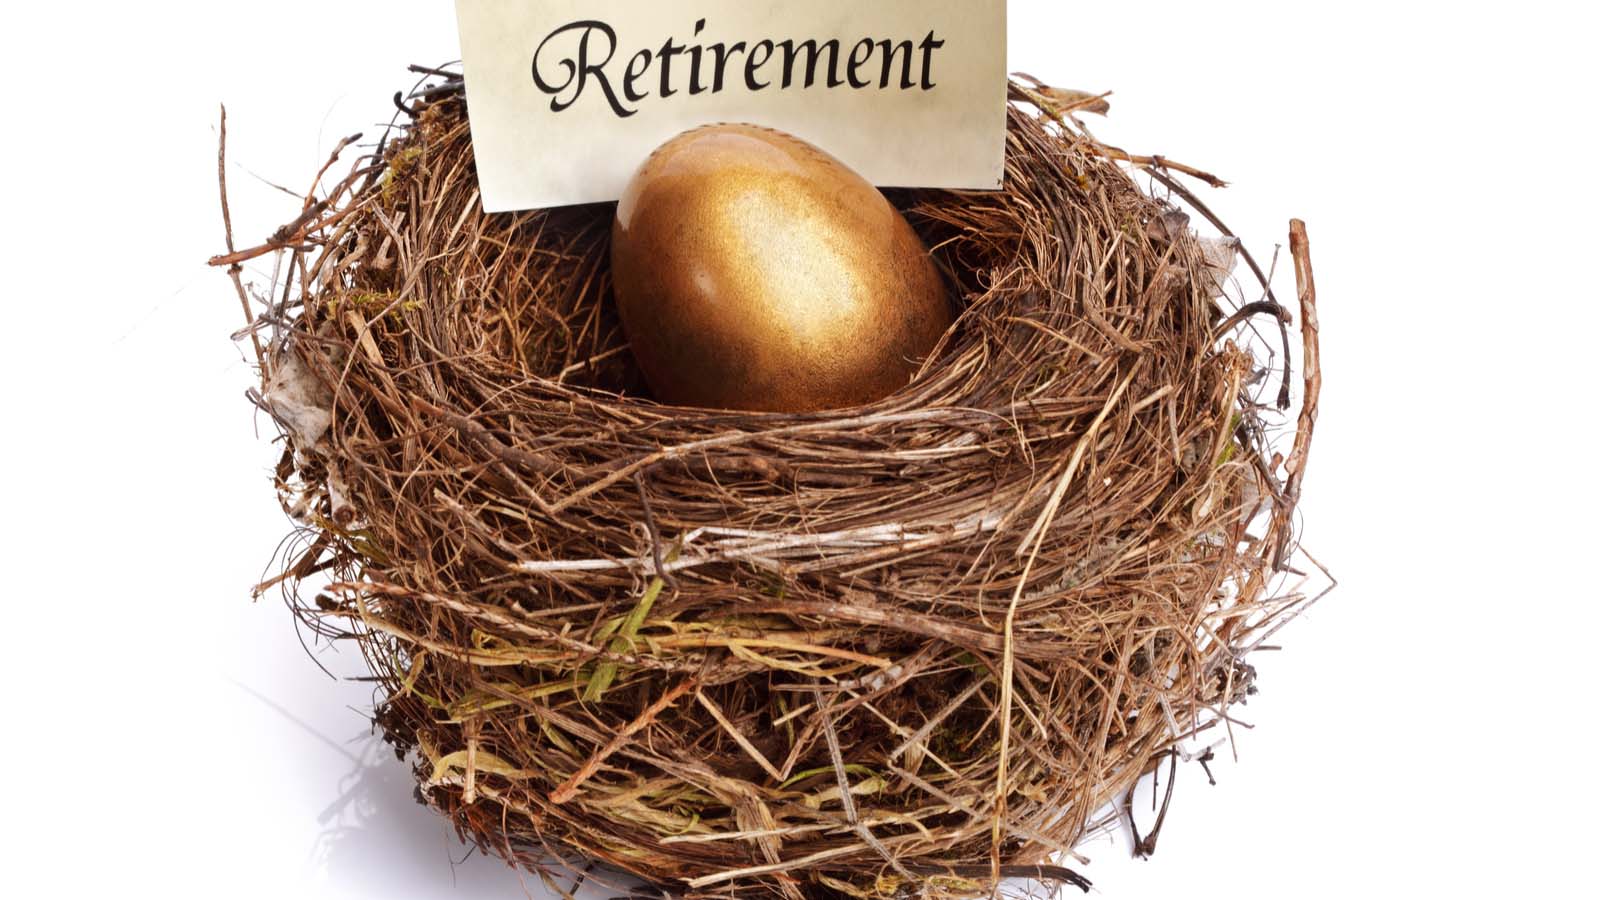 7 of the Best Retirement Stocks to Buy Now for 2022